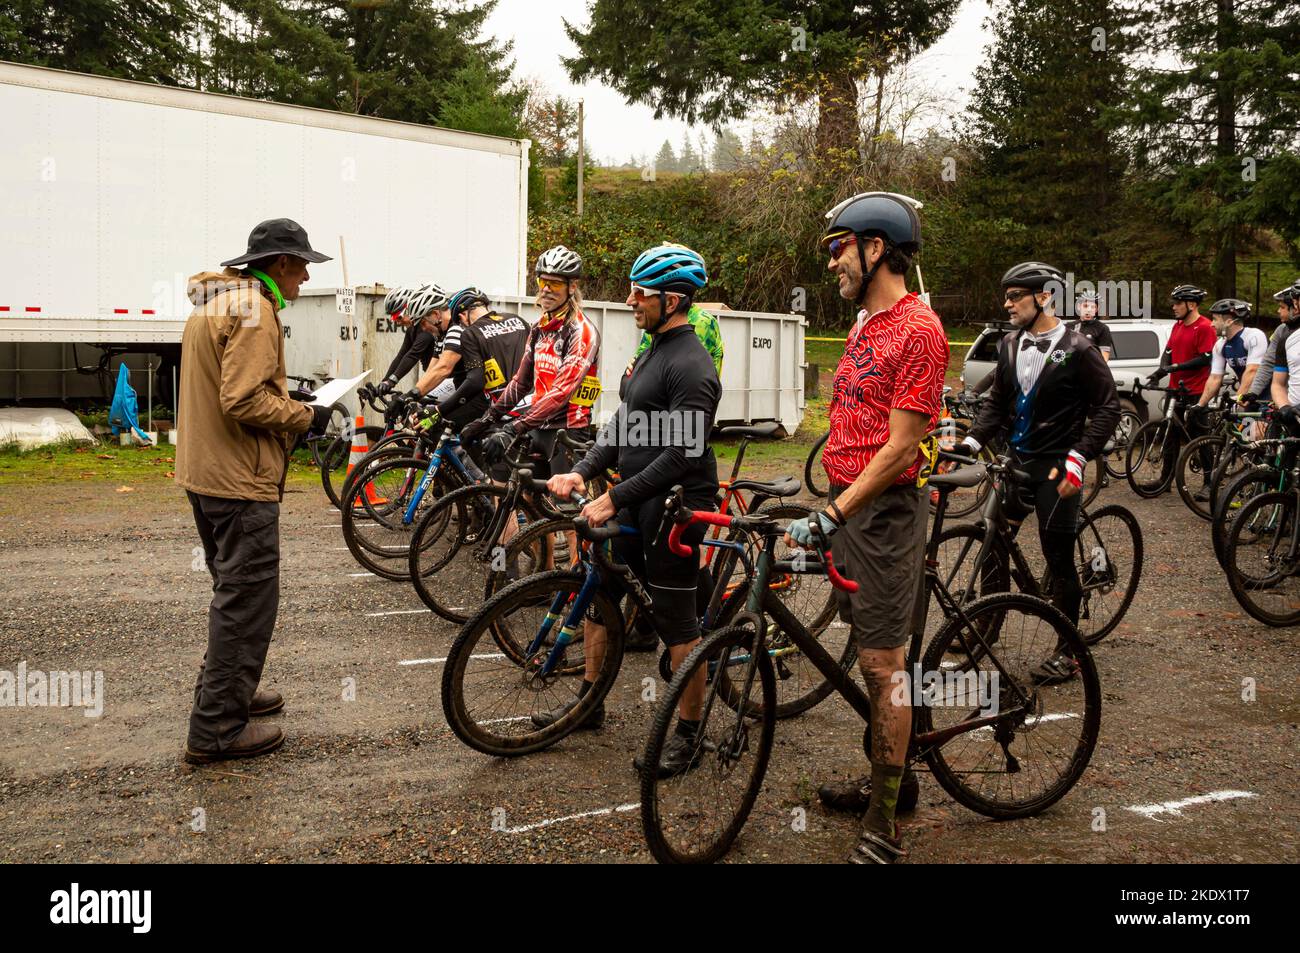 WA21420-00...WASHINGTON - Line up for the men's 55+ category 4 cyclocross race at the Enumclaw fairgrounds. Stock Photo